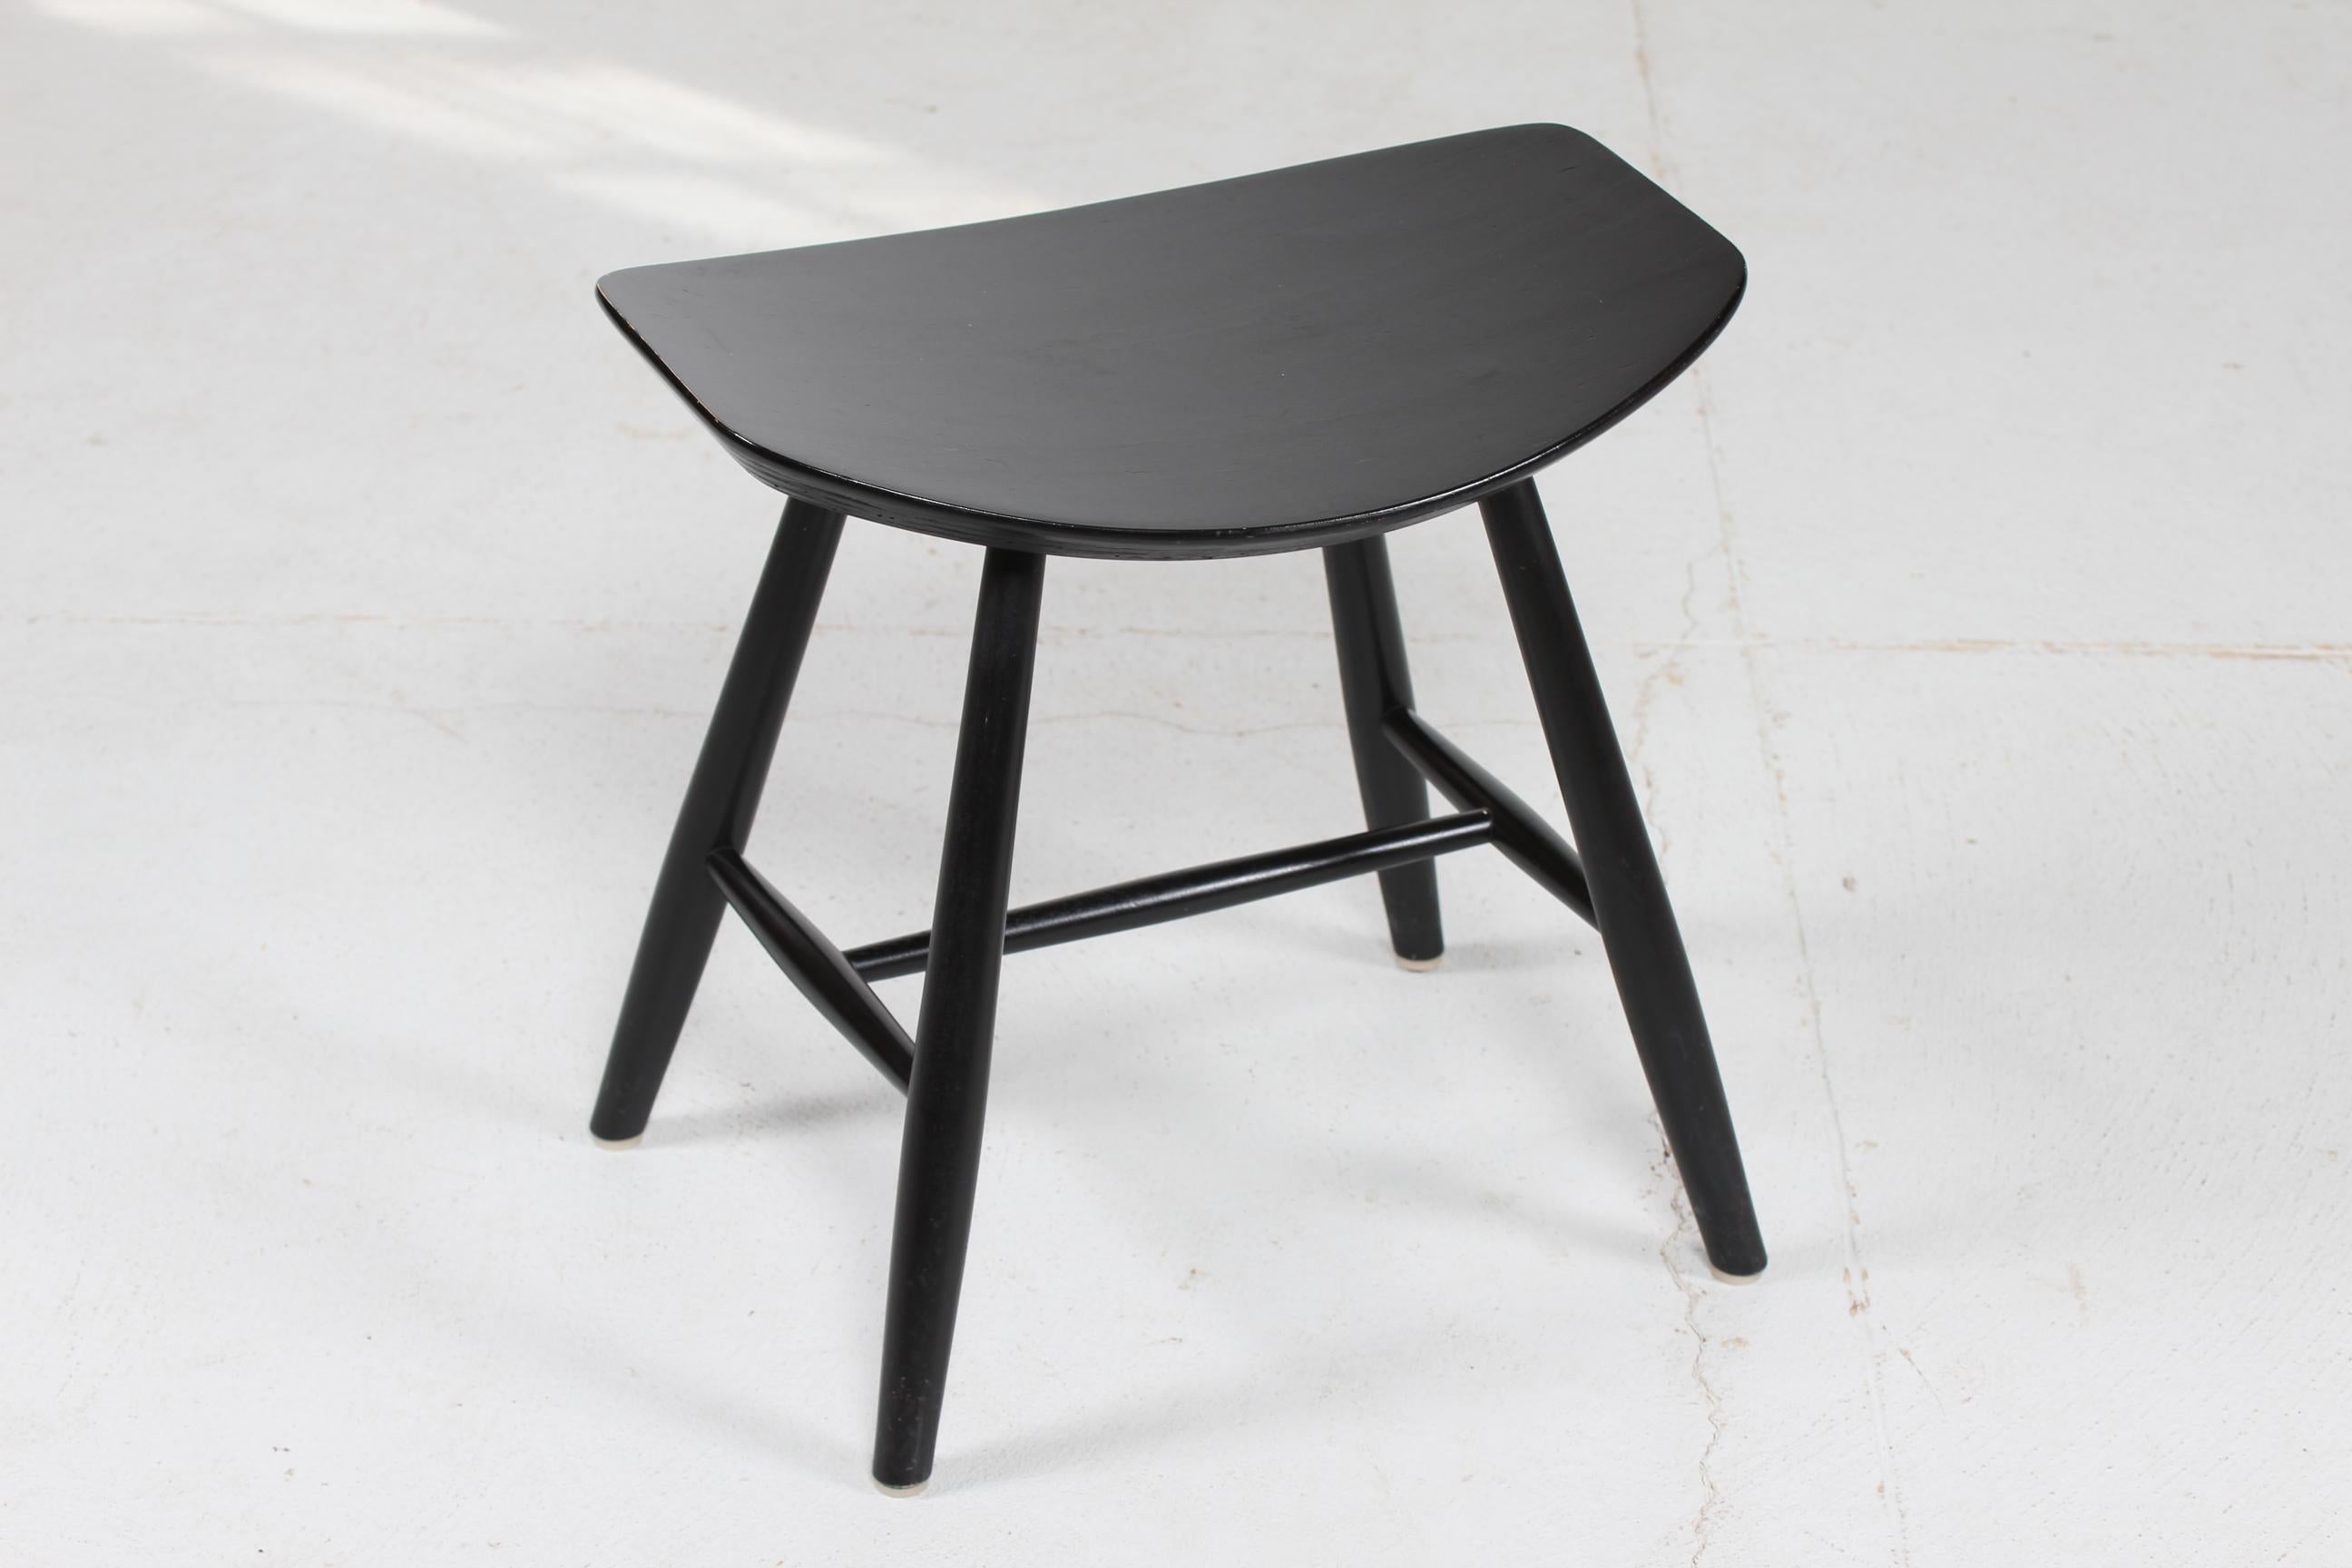 Stool model no. J 63 designed by the Danish cabinet maker Ejvind A Johansson (1923-2002) made for FDB Møbler Denmark in the 1950´s

The stool is made of solid beech with black lacquer

Nice vintage condition with patina - see photos of small